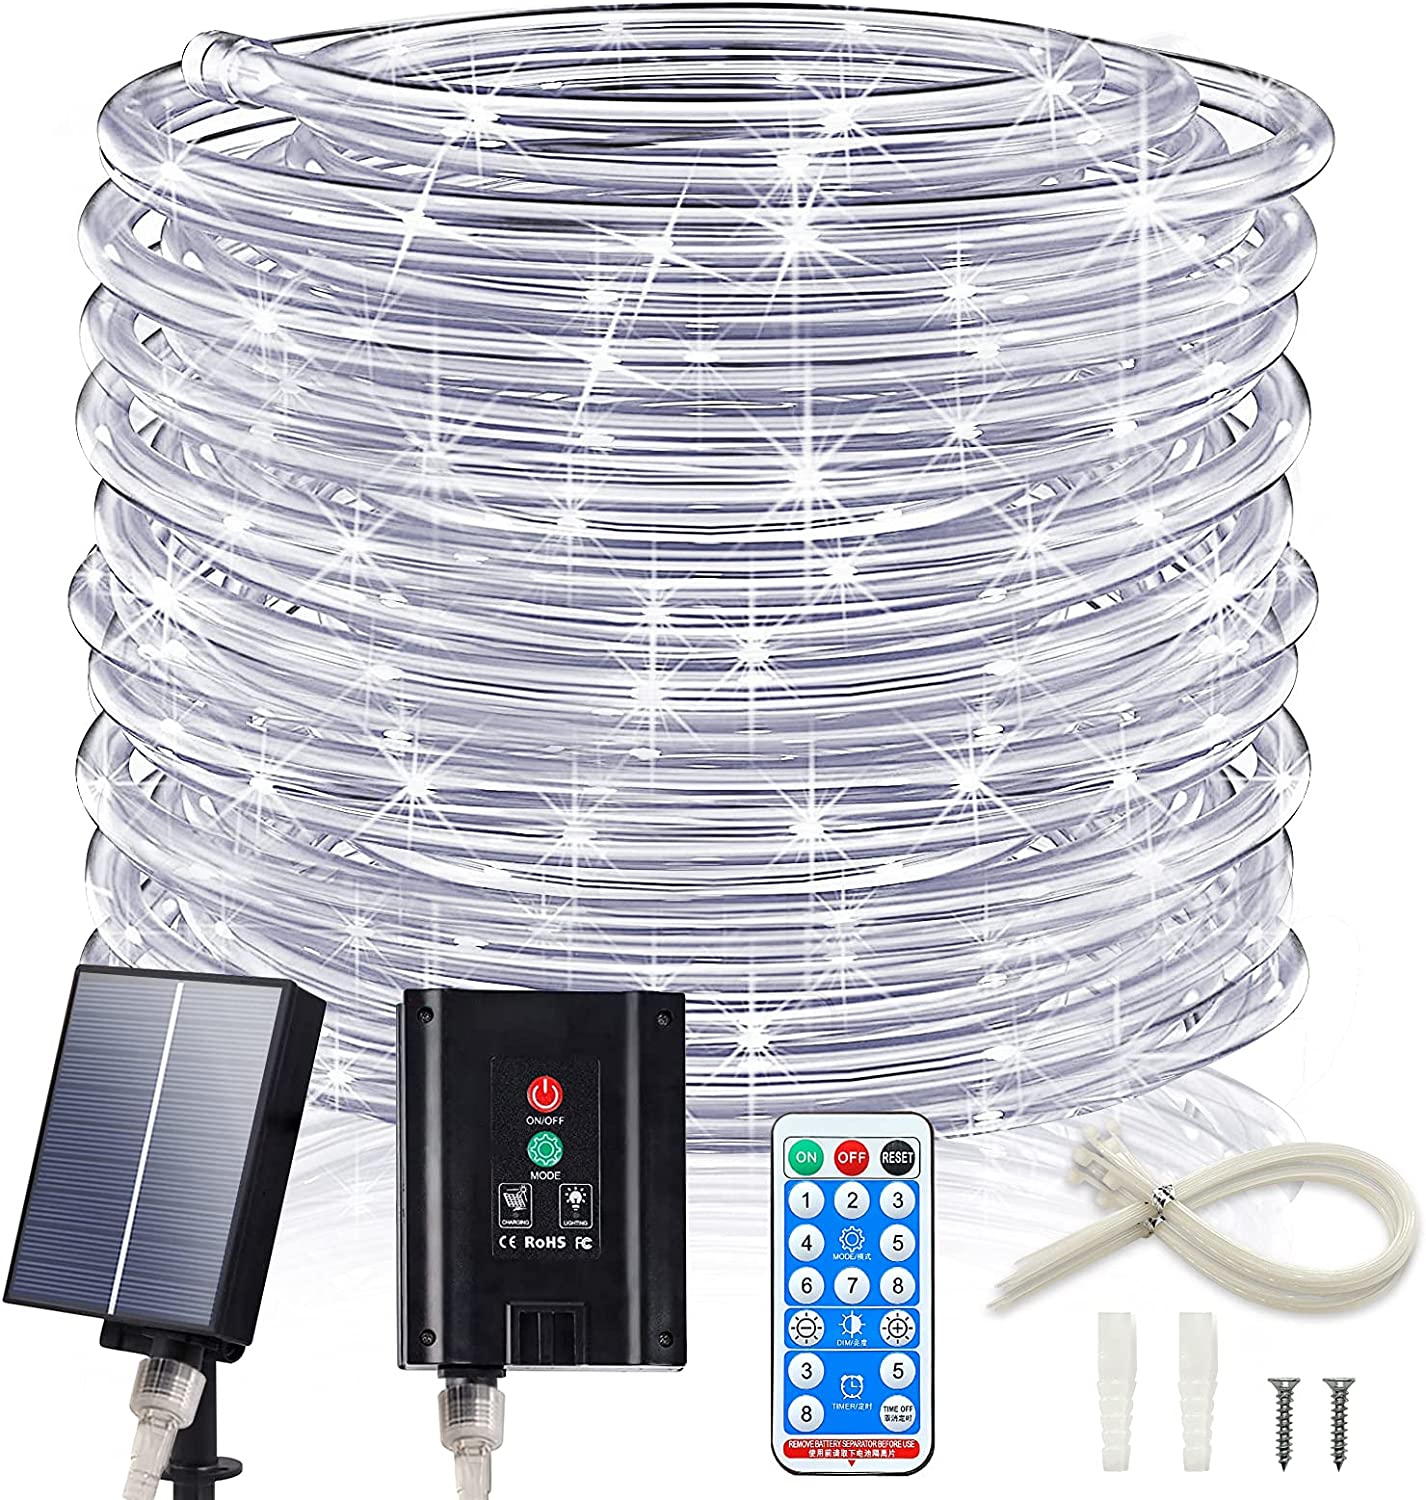 ICRGB Solar Rope Lights Outdoor, 72FT 200 LED Solar Rope Lights, Outdoor IP67 Waterproof 8 Modes Garden Christmas Lights Decorative for Outdoor Patio Porch Tree Wedding Christmas Pool Cool White